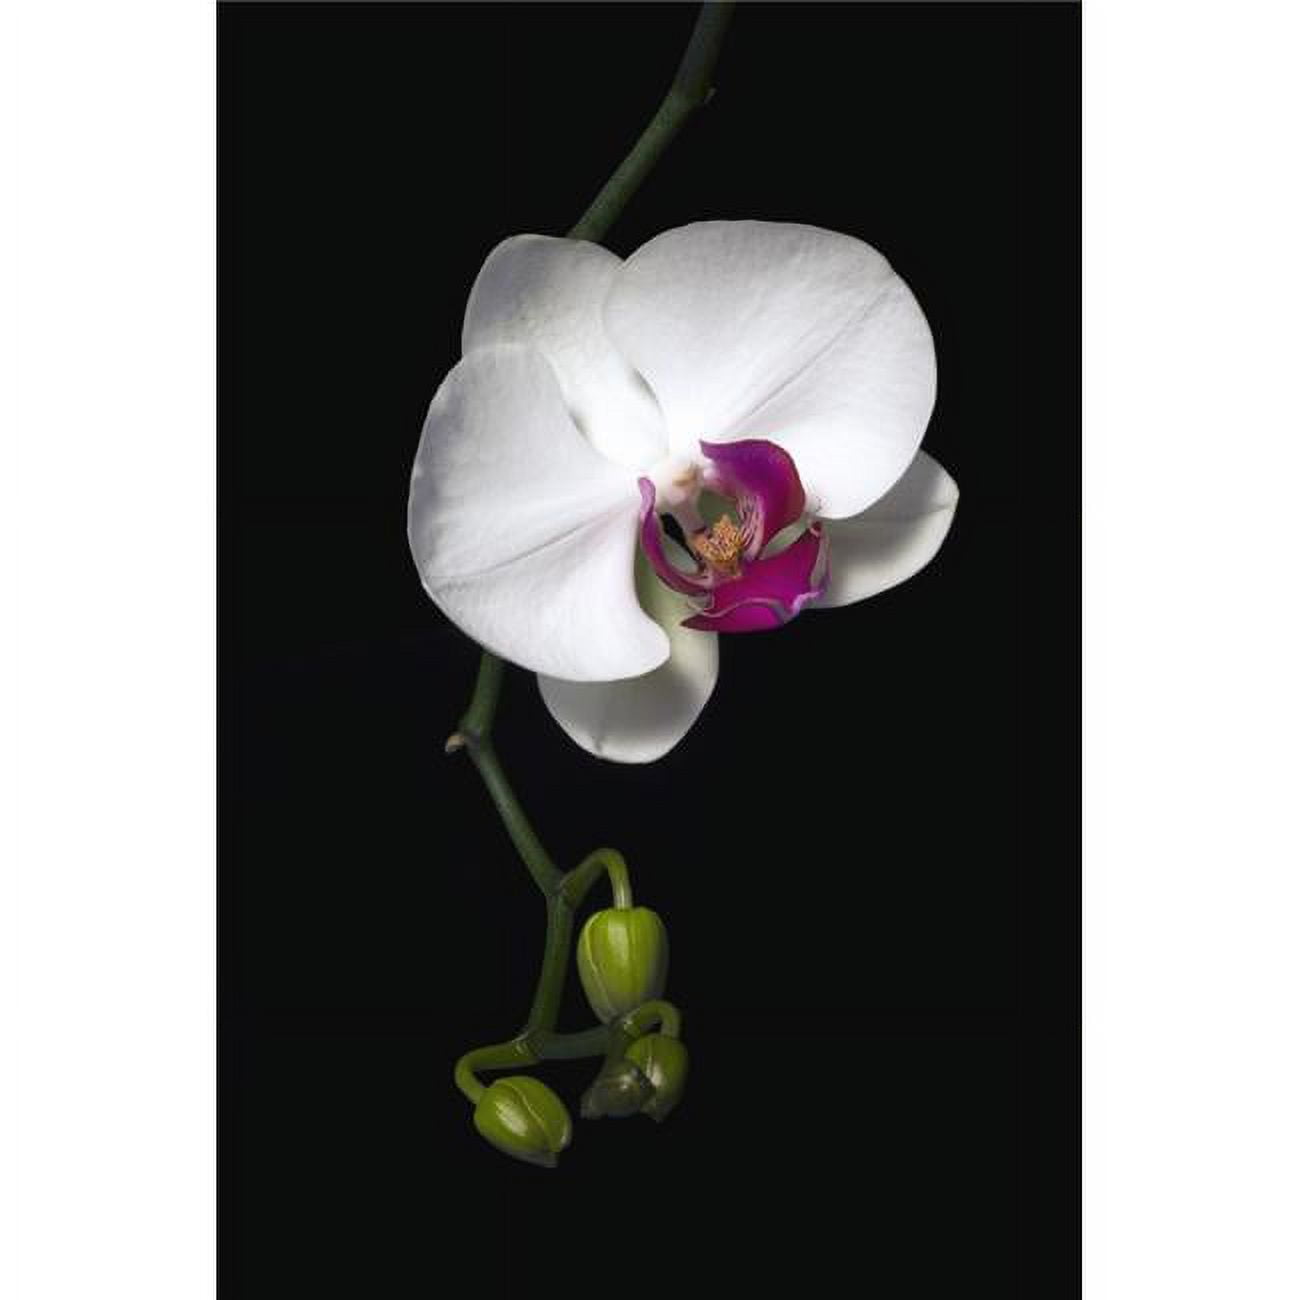 Posterazzi DPI1831101LARGE Orchid Poster Print by David Chapman, 24 x 36 -  Large